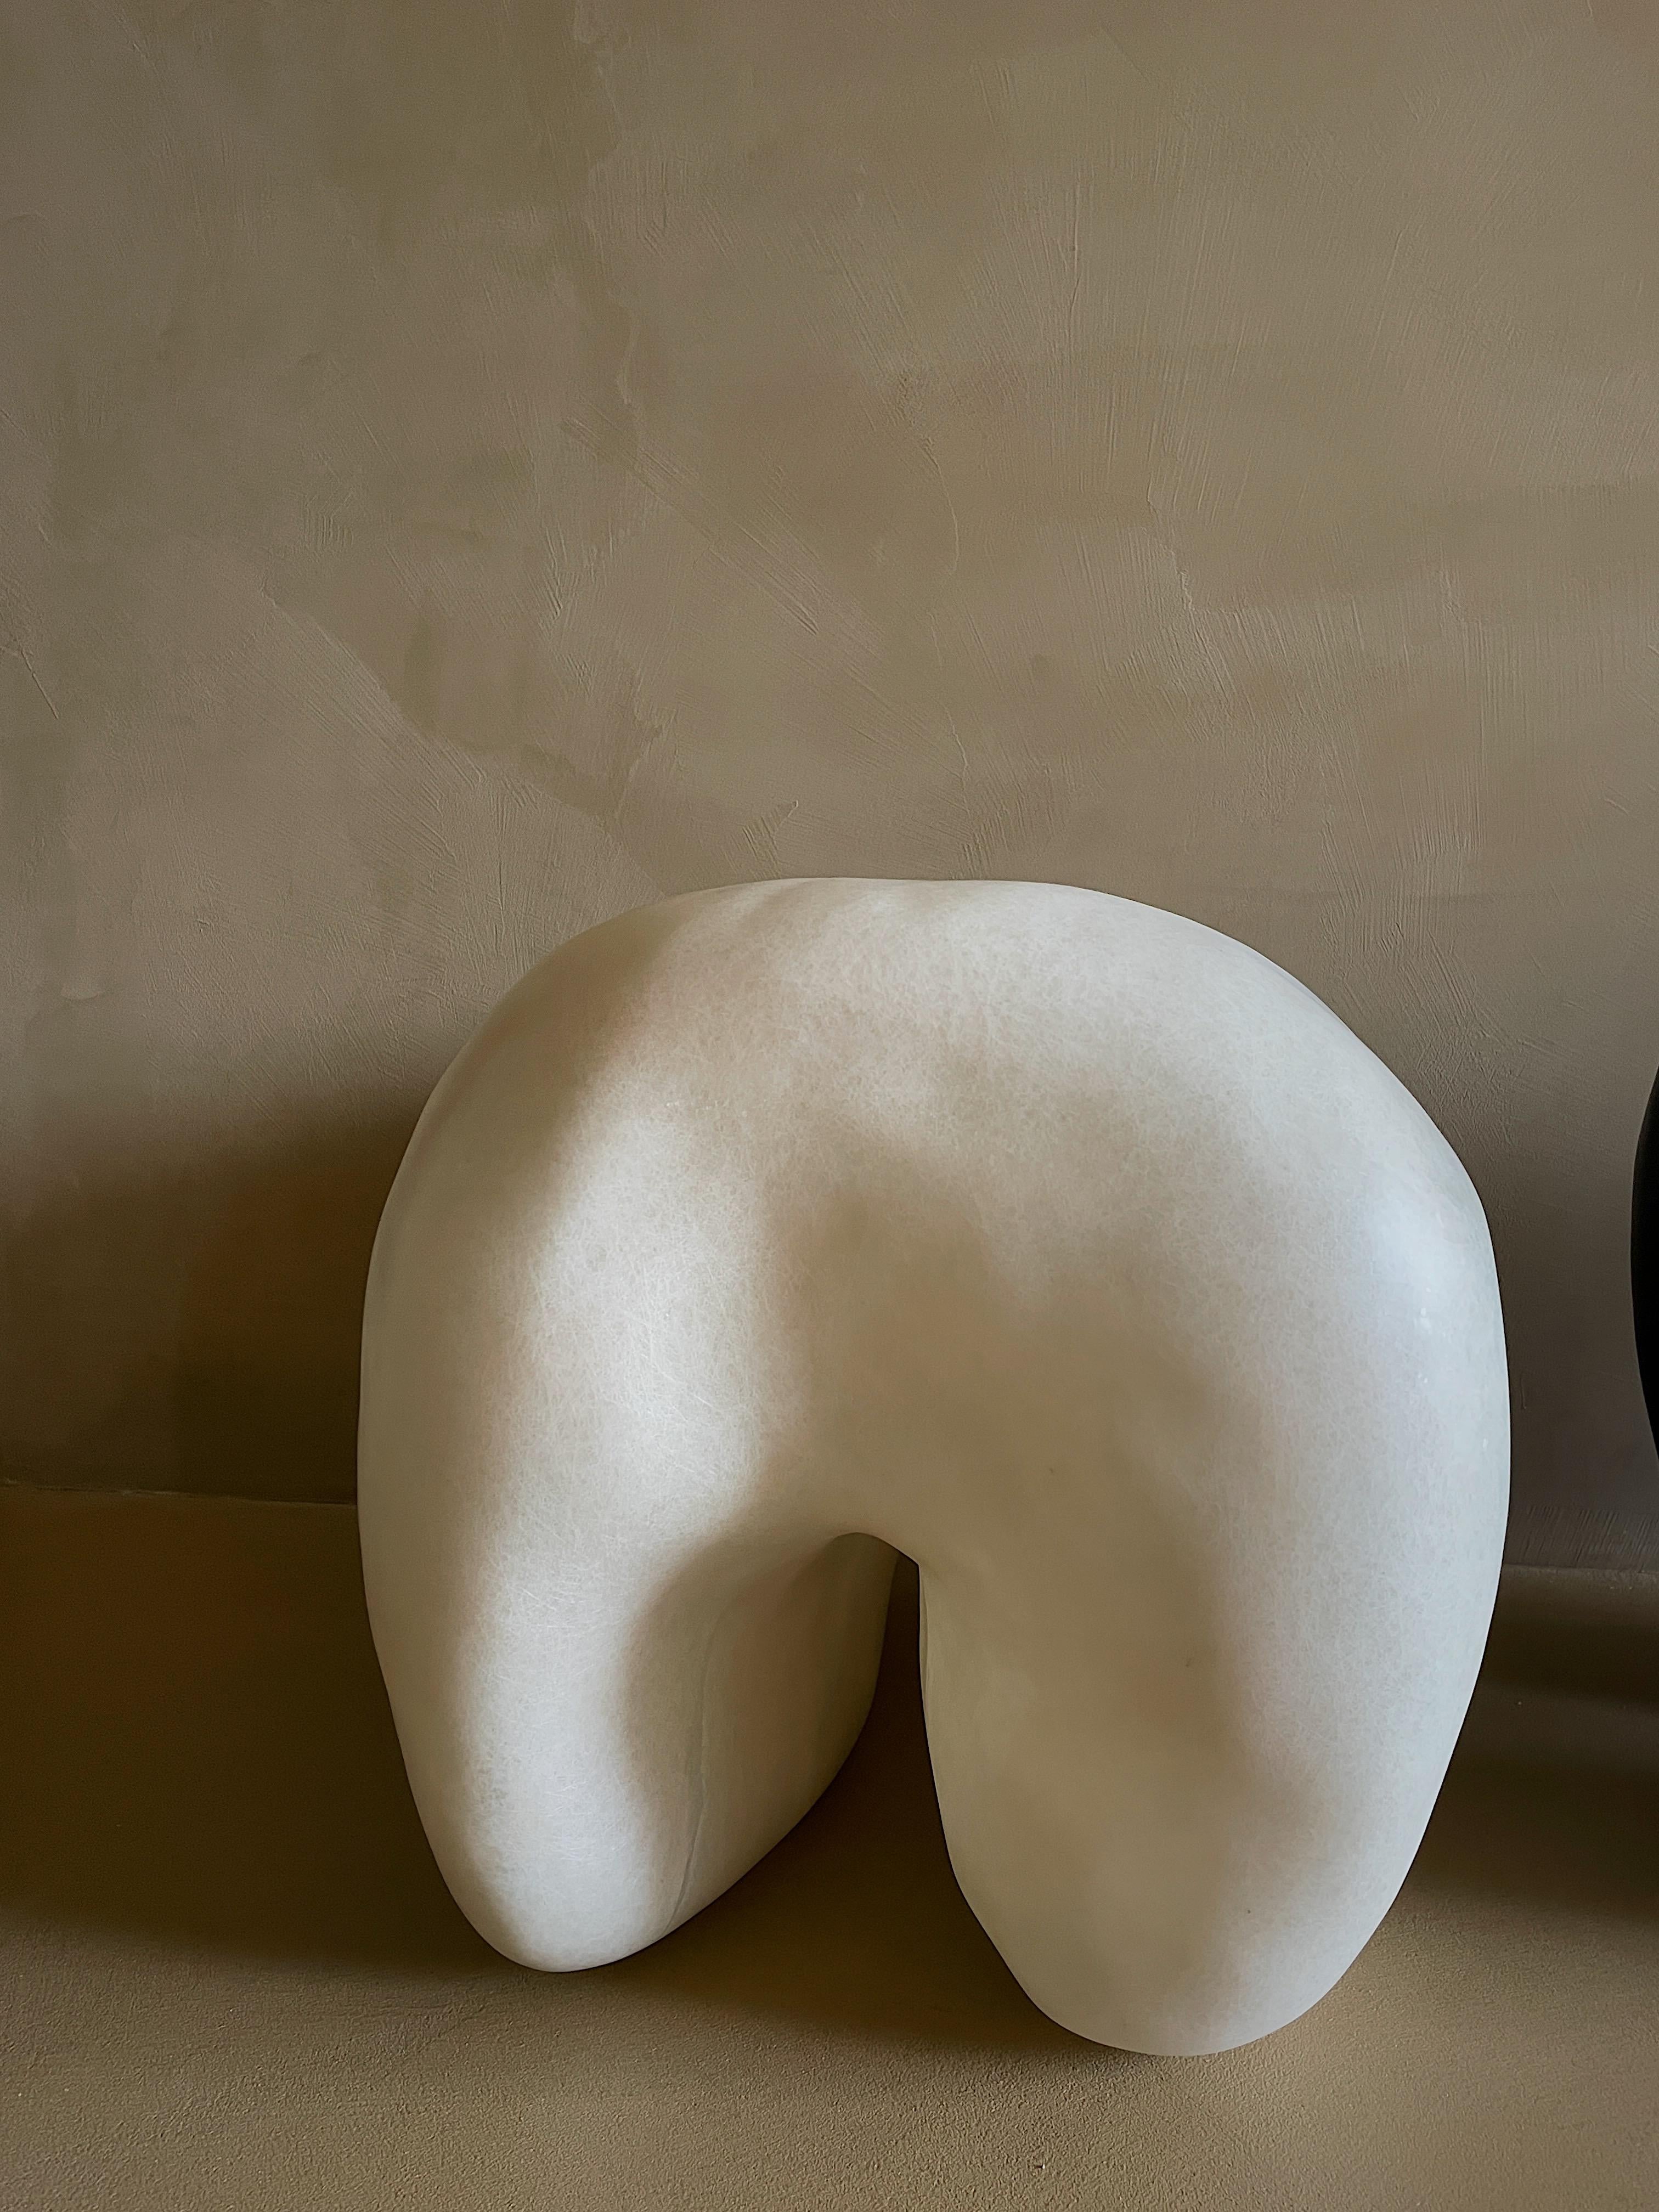 Tooth stool by Karstudio
Dimensions: W 60 x D 45 x H 43 cm
Materials: FRP
Available in black

Kar, is the root of Sanskrit Karma, meaning karmic repetition. We seek the cause and effect in aesthetics, inspired from the past, the present, and